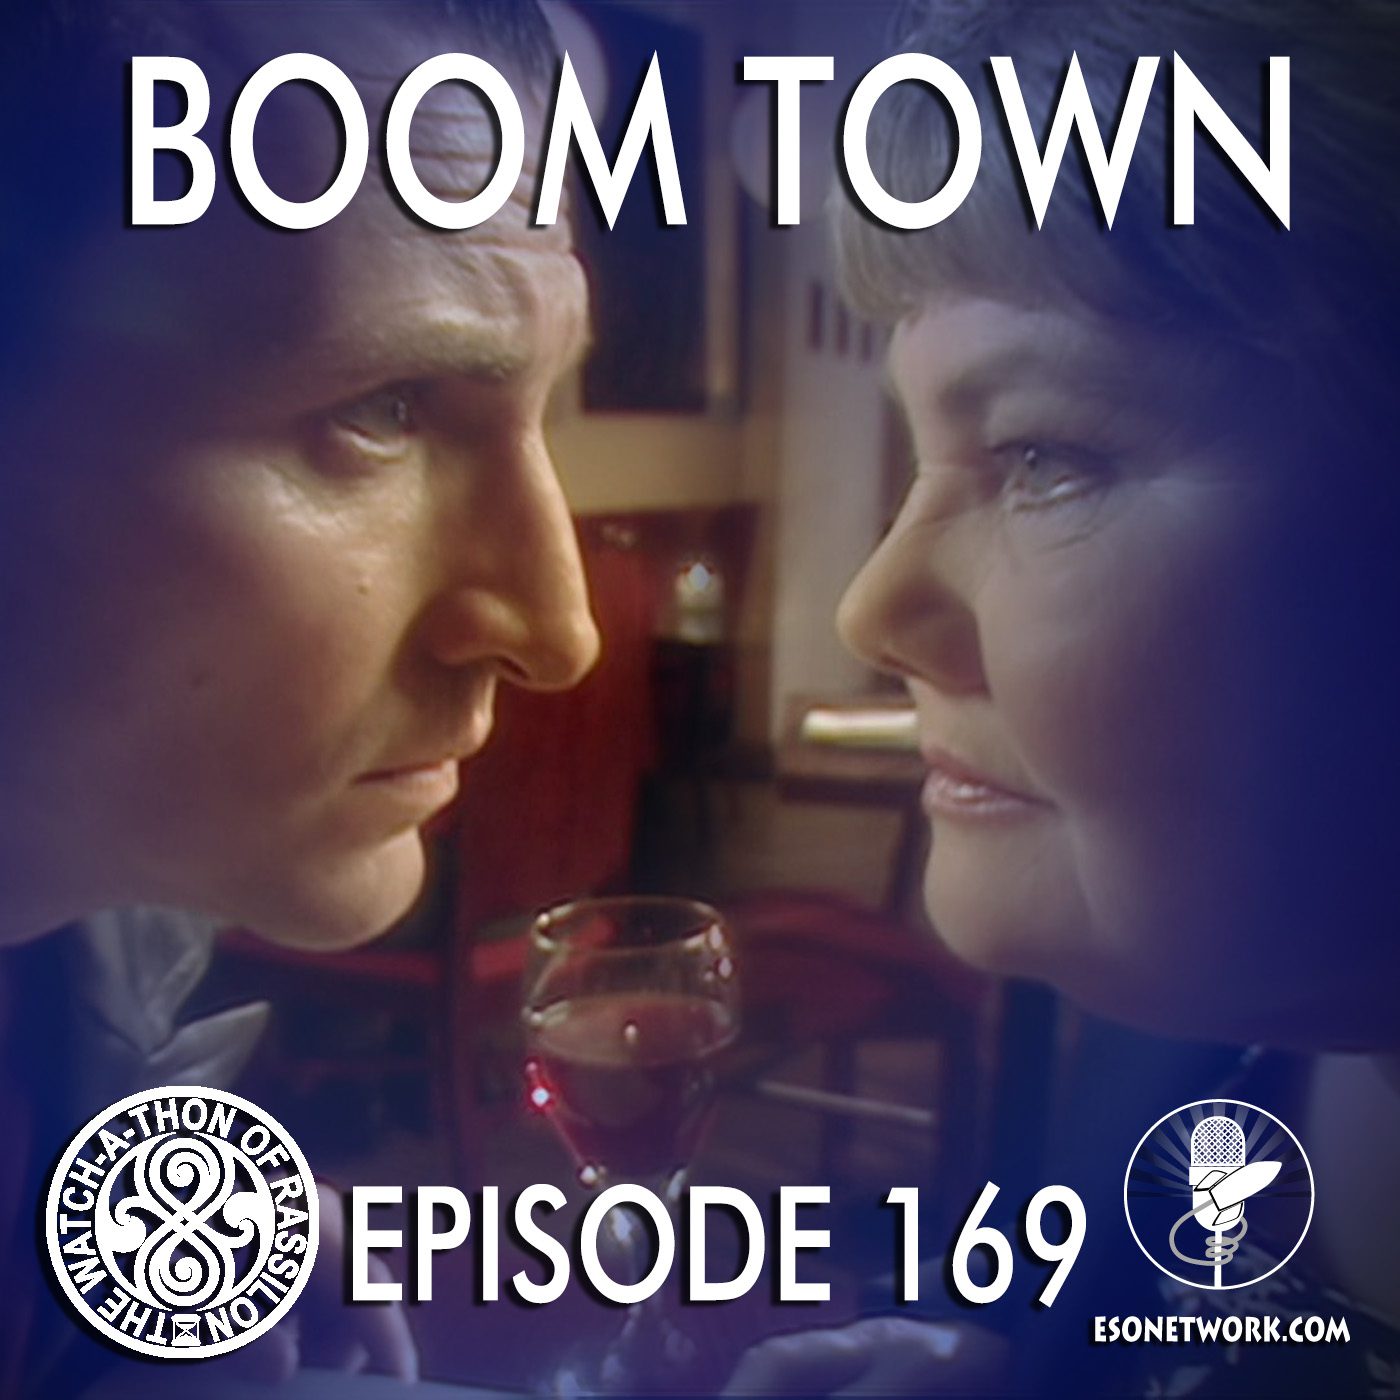 The Watch-A-Thon of Rassilon: Episode 169: Boom Town